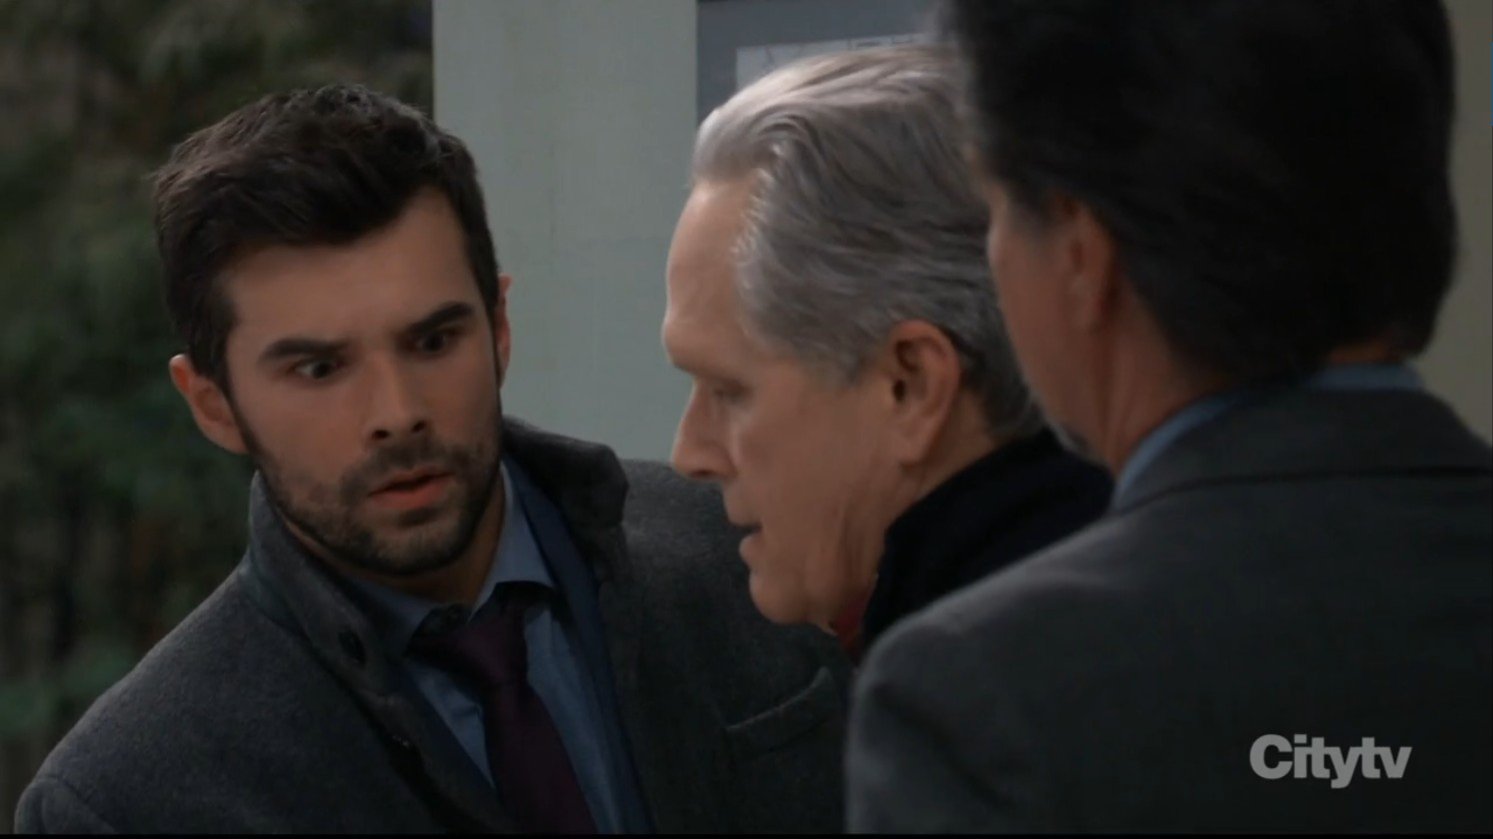 chase worries about gregory's ALS Gh recaps 